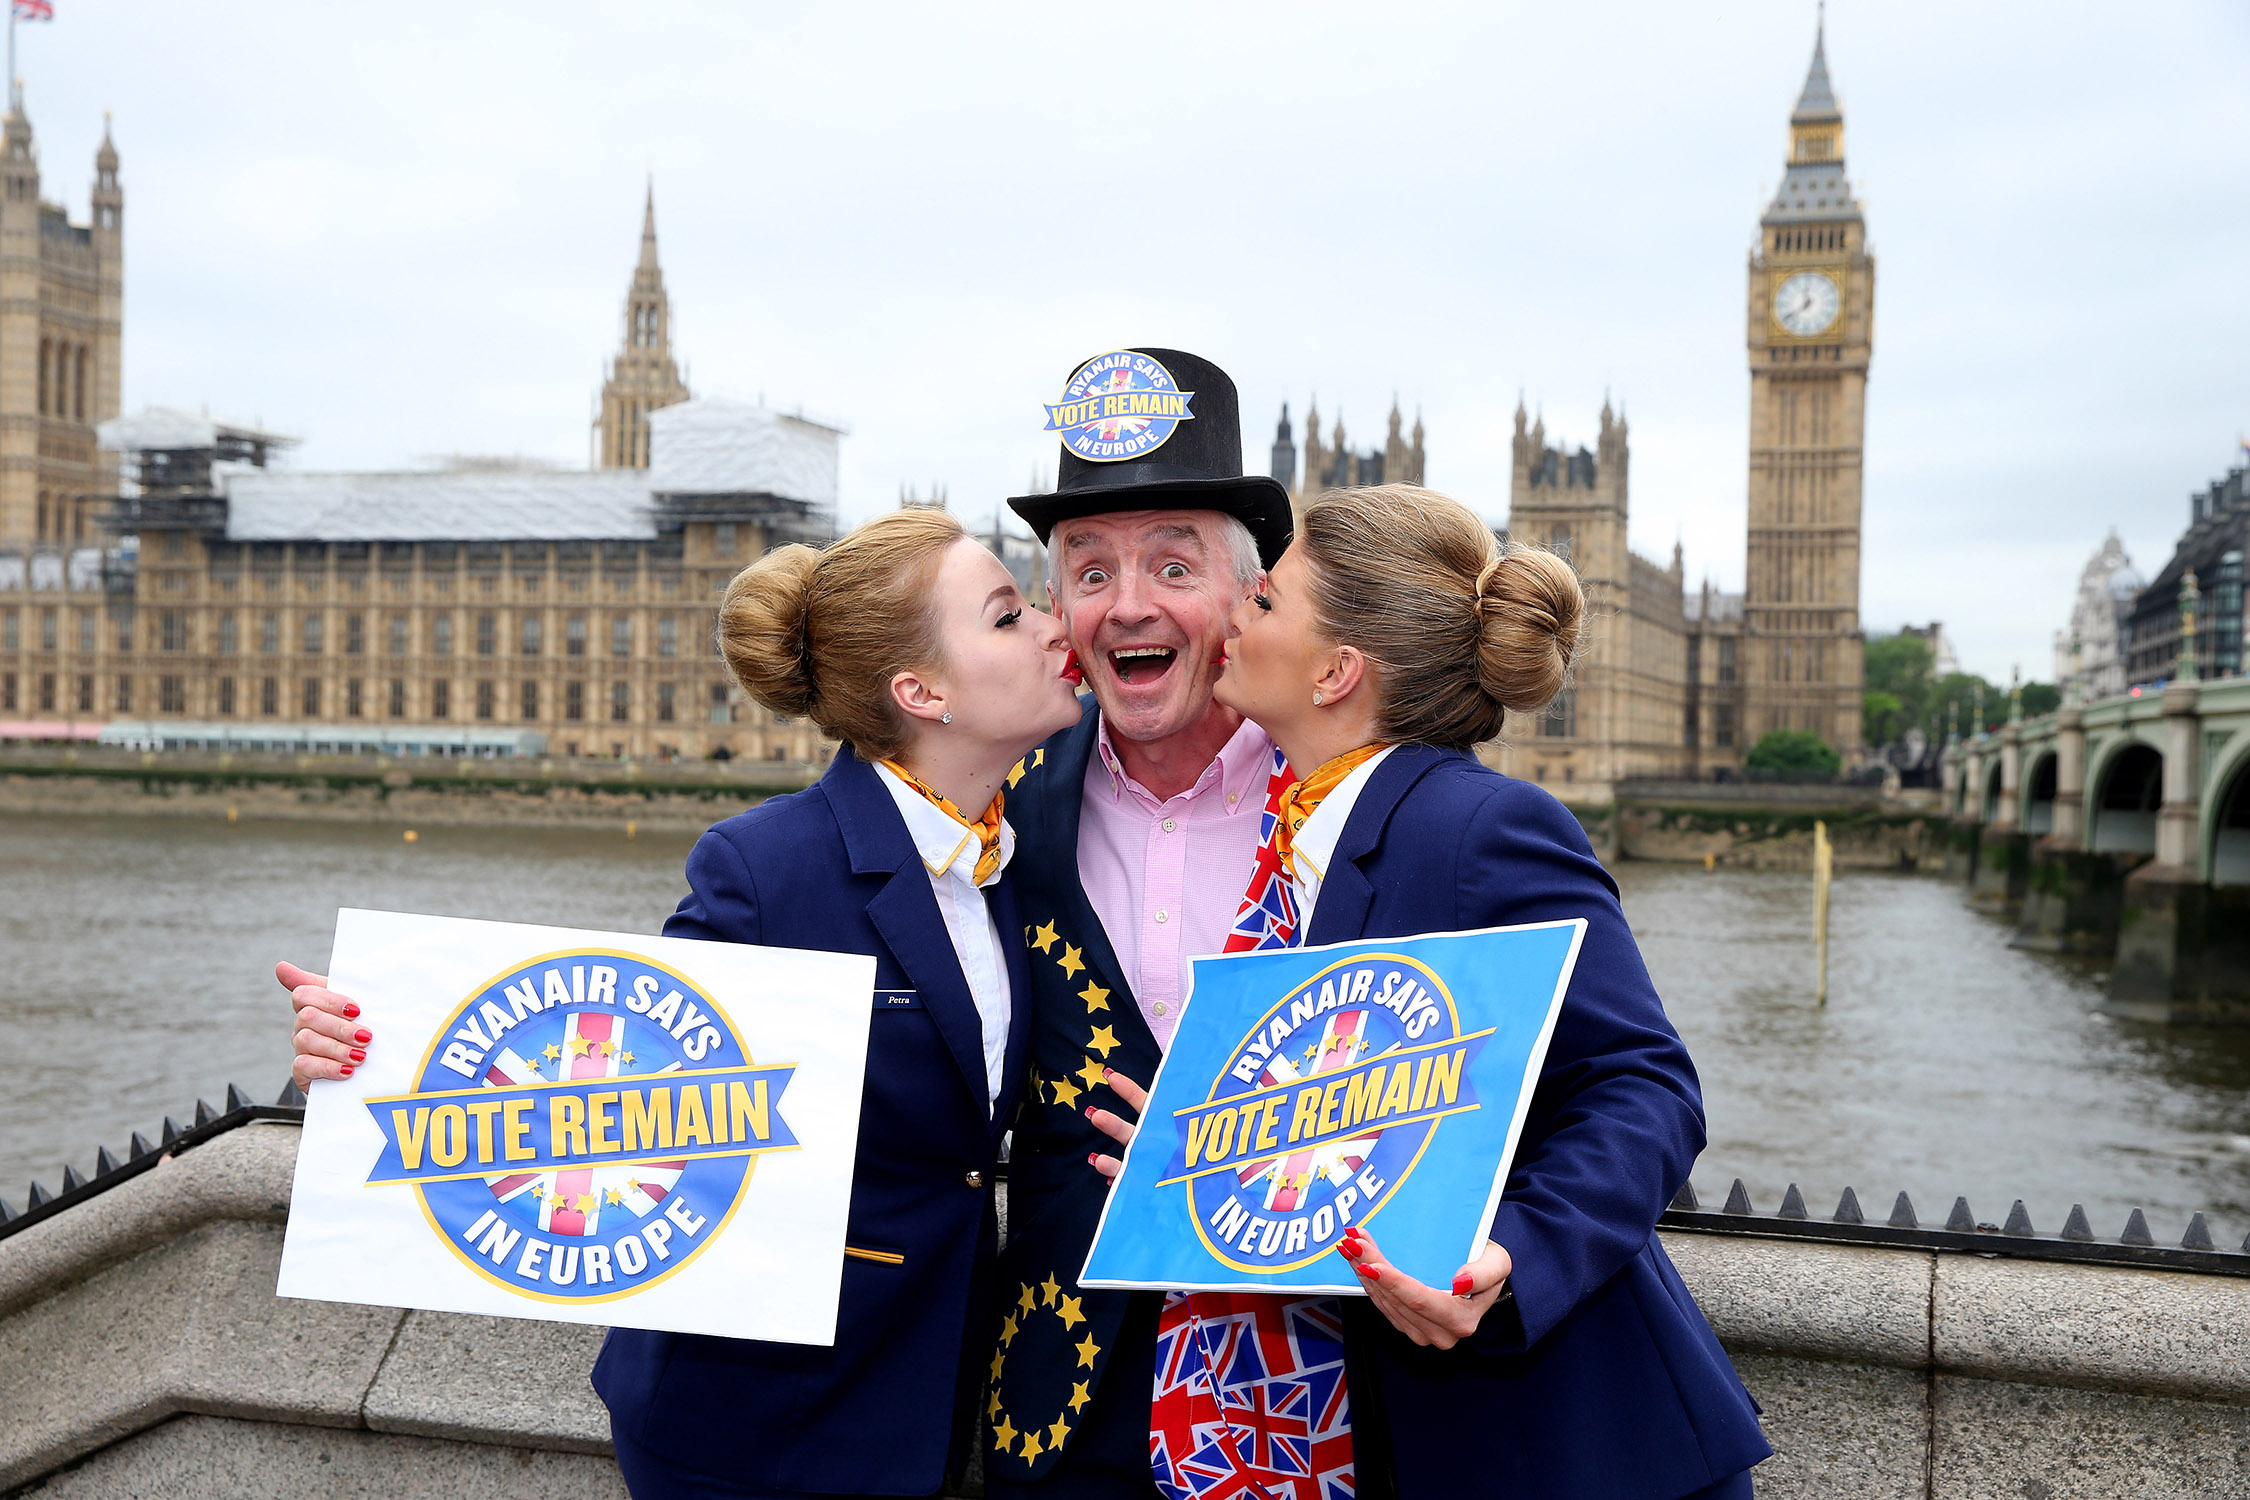 Picture by Philip Hollis for Ryanair   22-6-16 Michael O'Leary Remain photocall Westminster